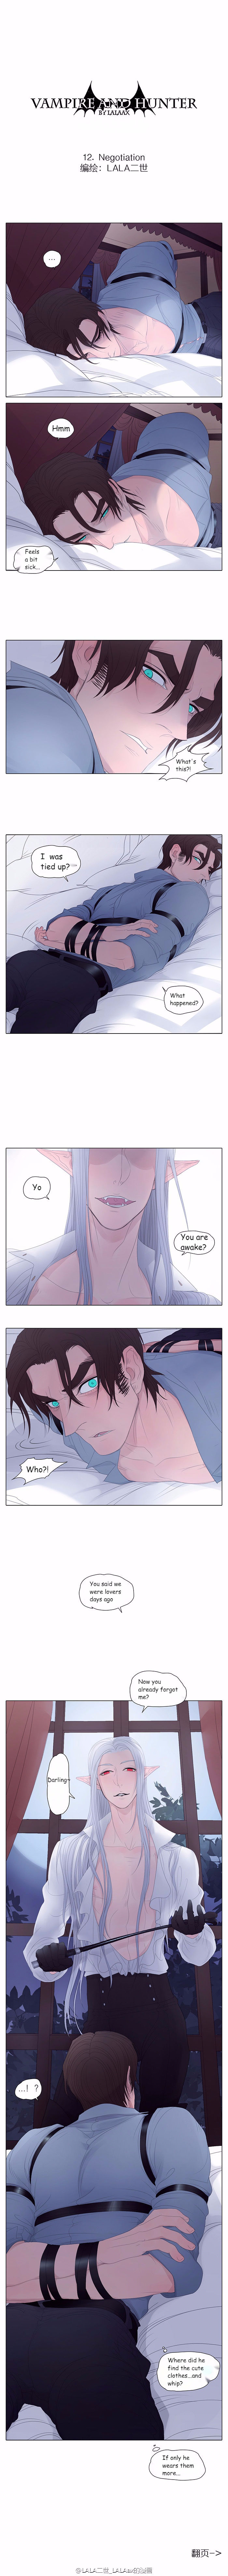 Vampire And Hunter - Page 1